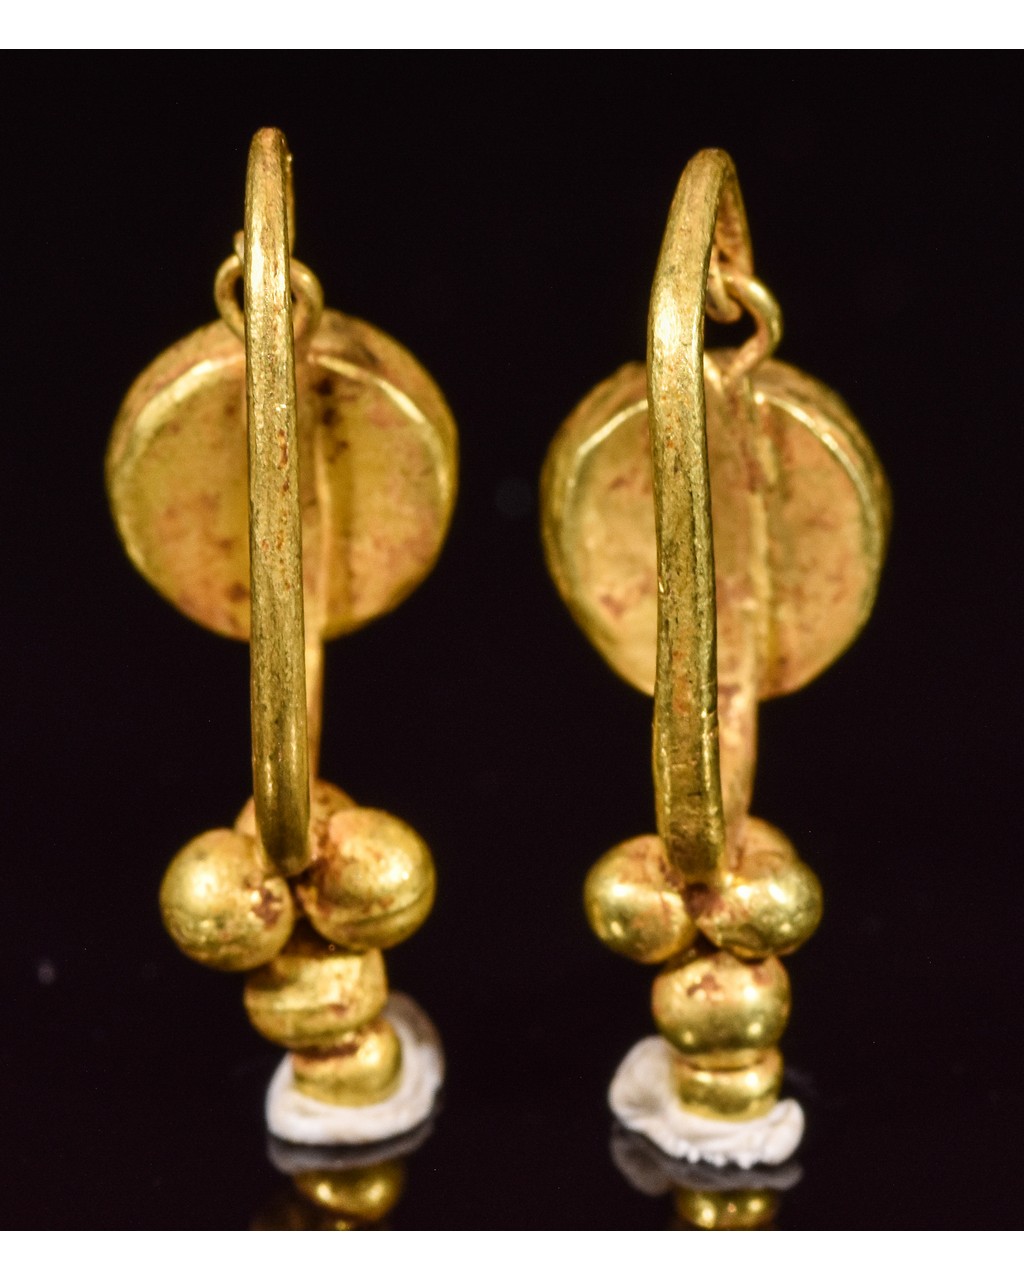 PAIR OF ROMAN GOLD EARRINGS WITH GARNETS - Image 3 of 7